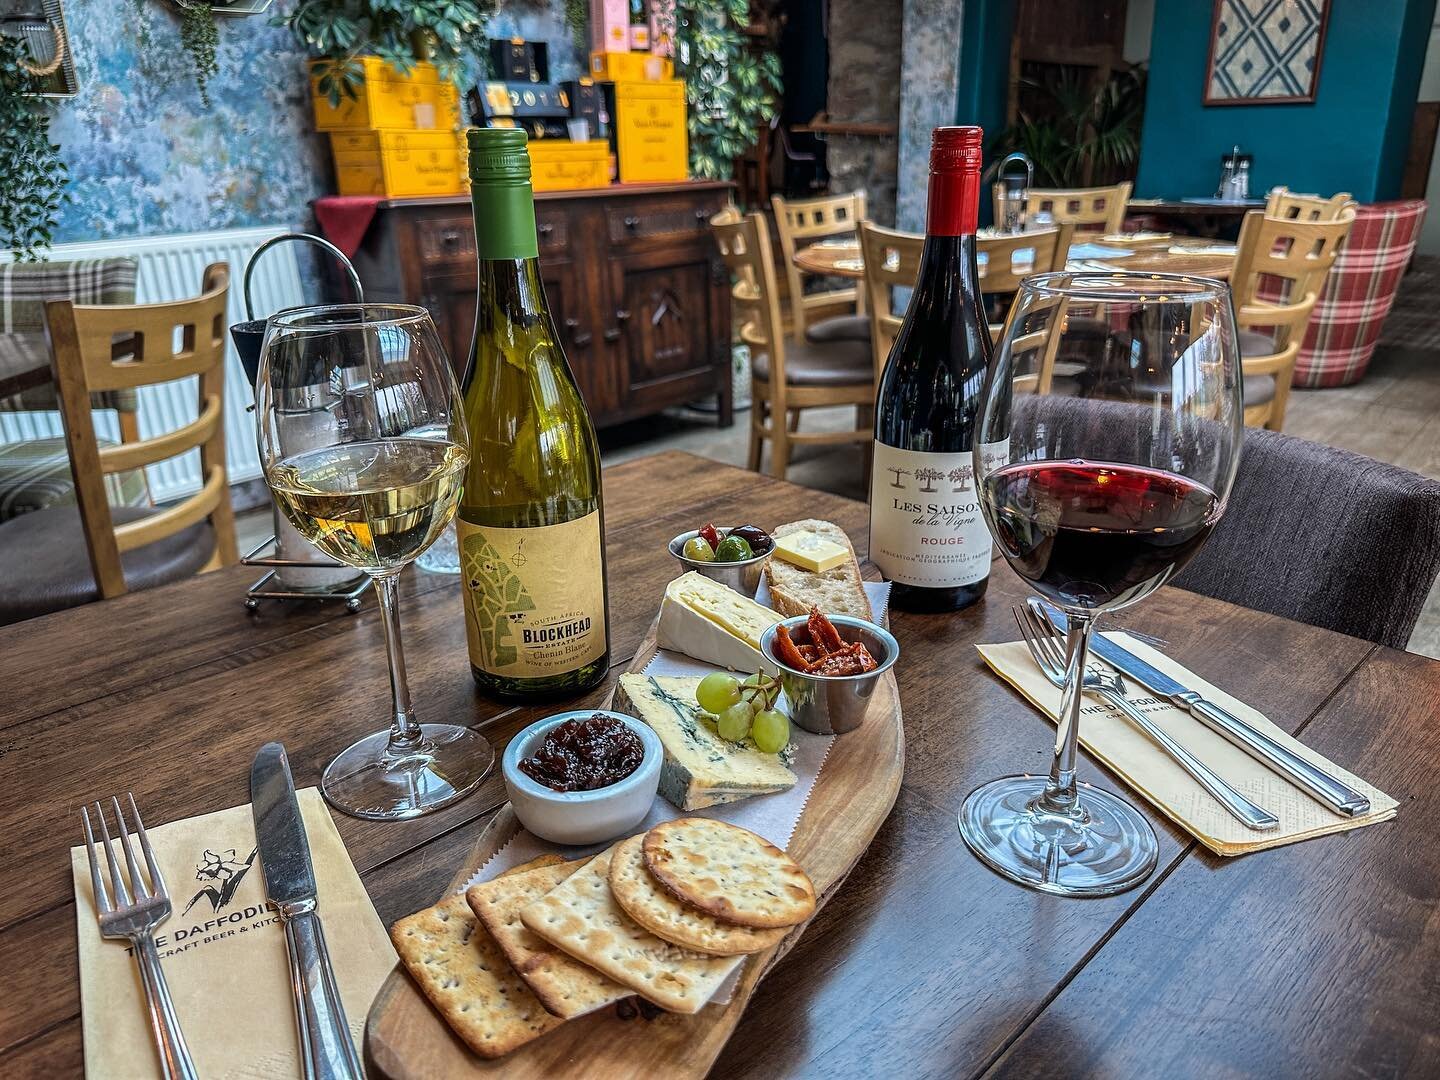 WINE WEDNESDAYS🍷🥳 @thedaffodilinn 
From 5-7pm

House red or white bottle &amp; cheese board for &pound;24.95. Wednesdays only!

Wine and friends are a great blend 😍.
Tag your favourite drink buddies 🎉

@lush.wines 

#winetasting #wine #wimewednes